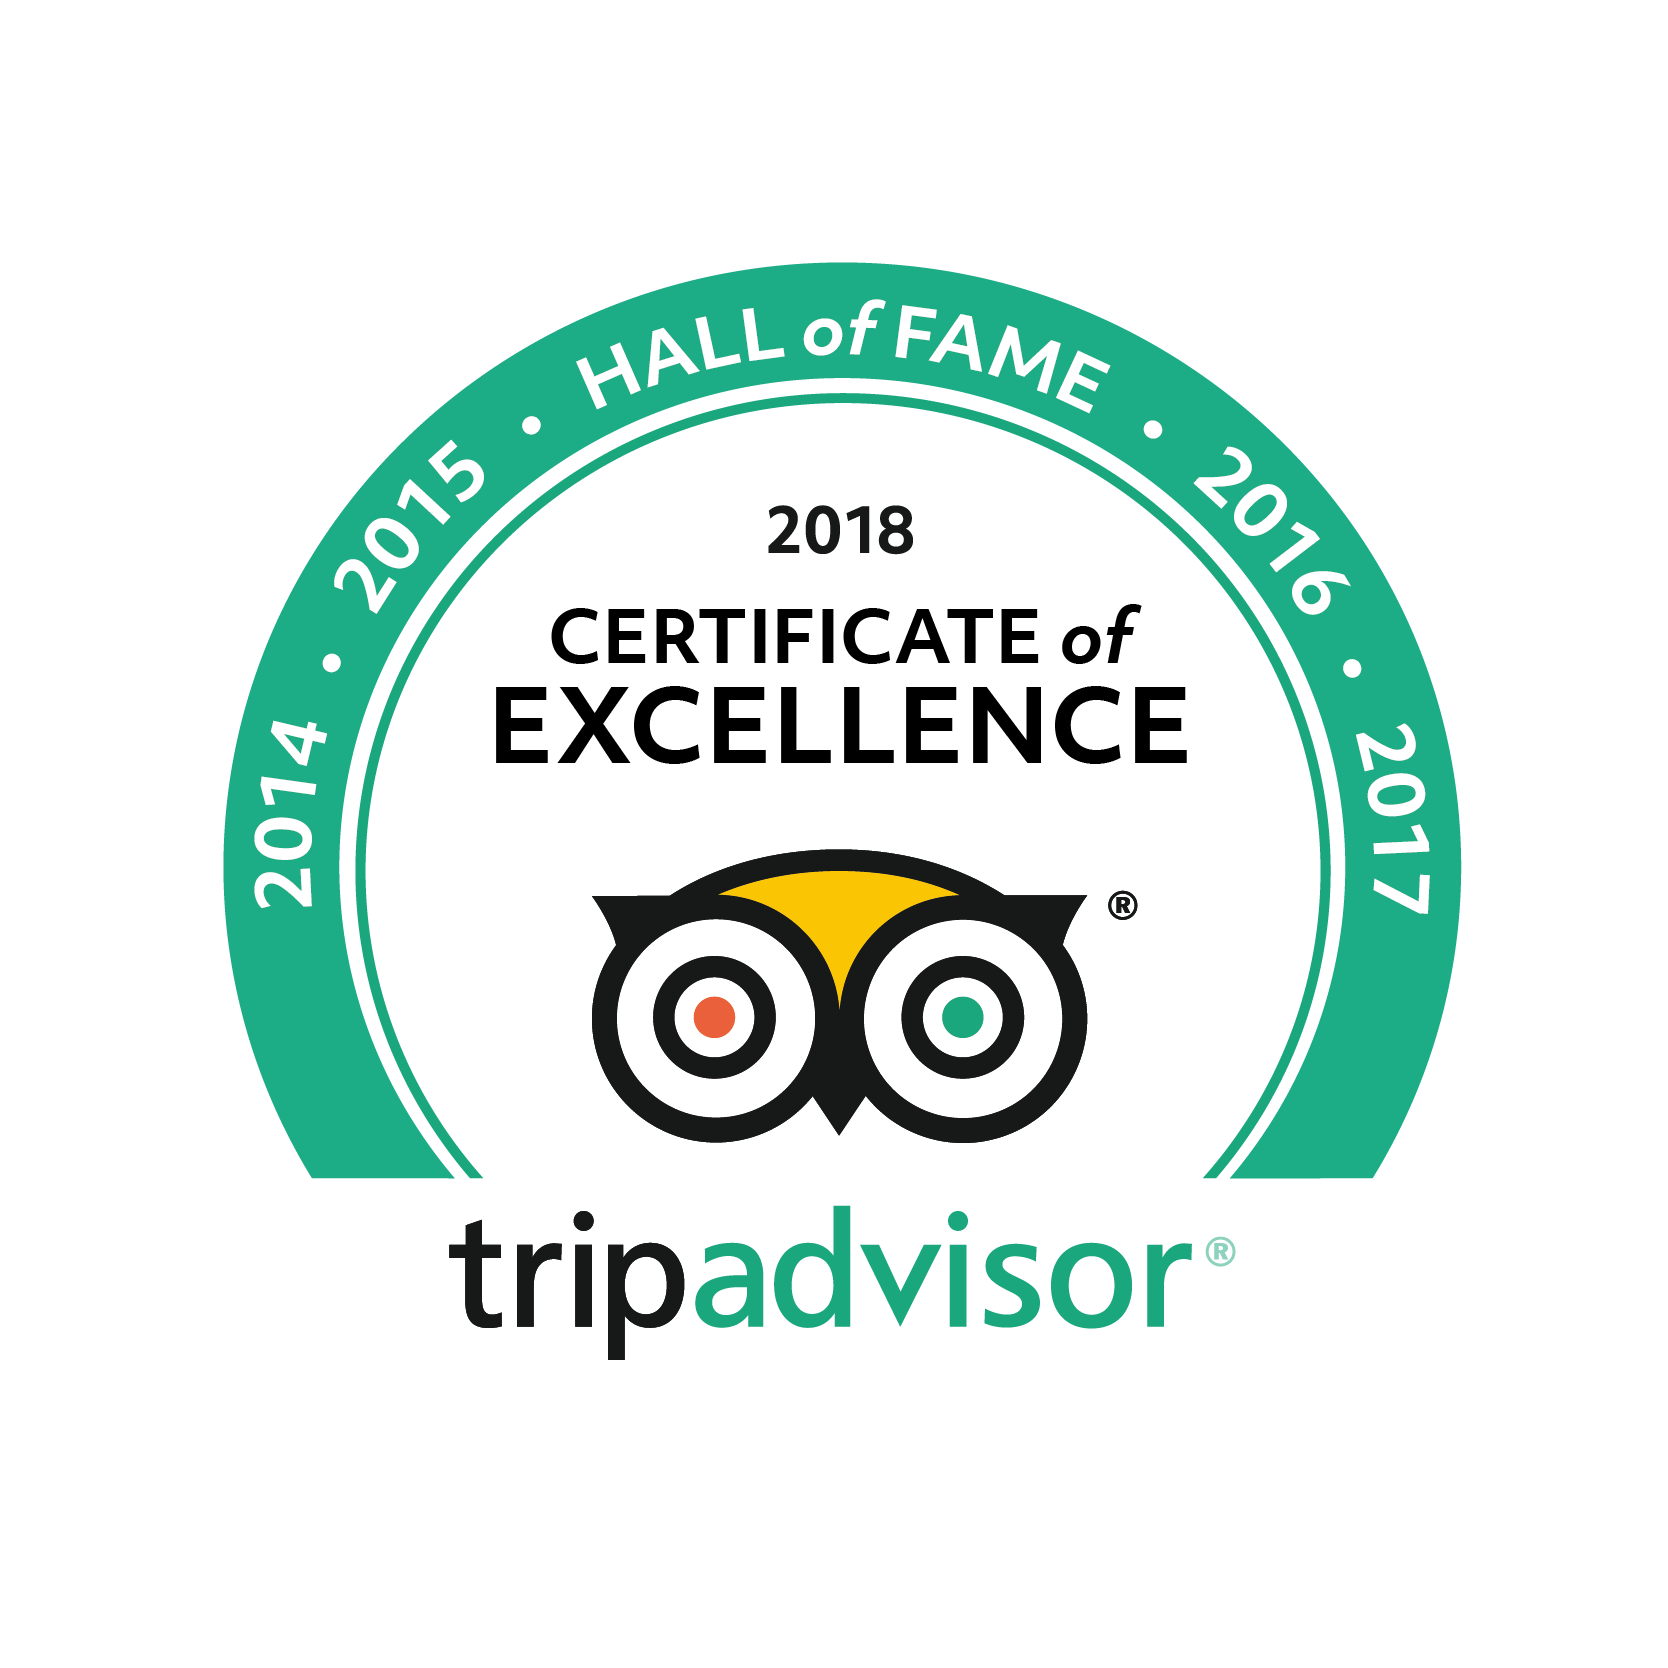 The Colony Hotel Bali - TripAdvisor 2018 Certificate of Excellence